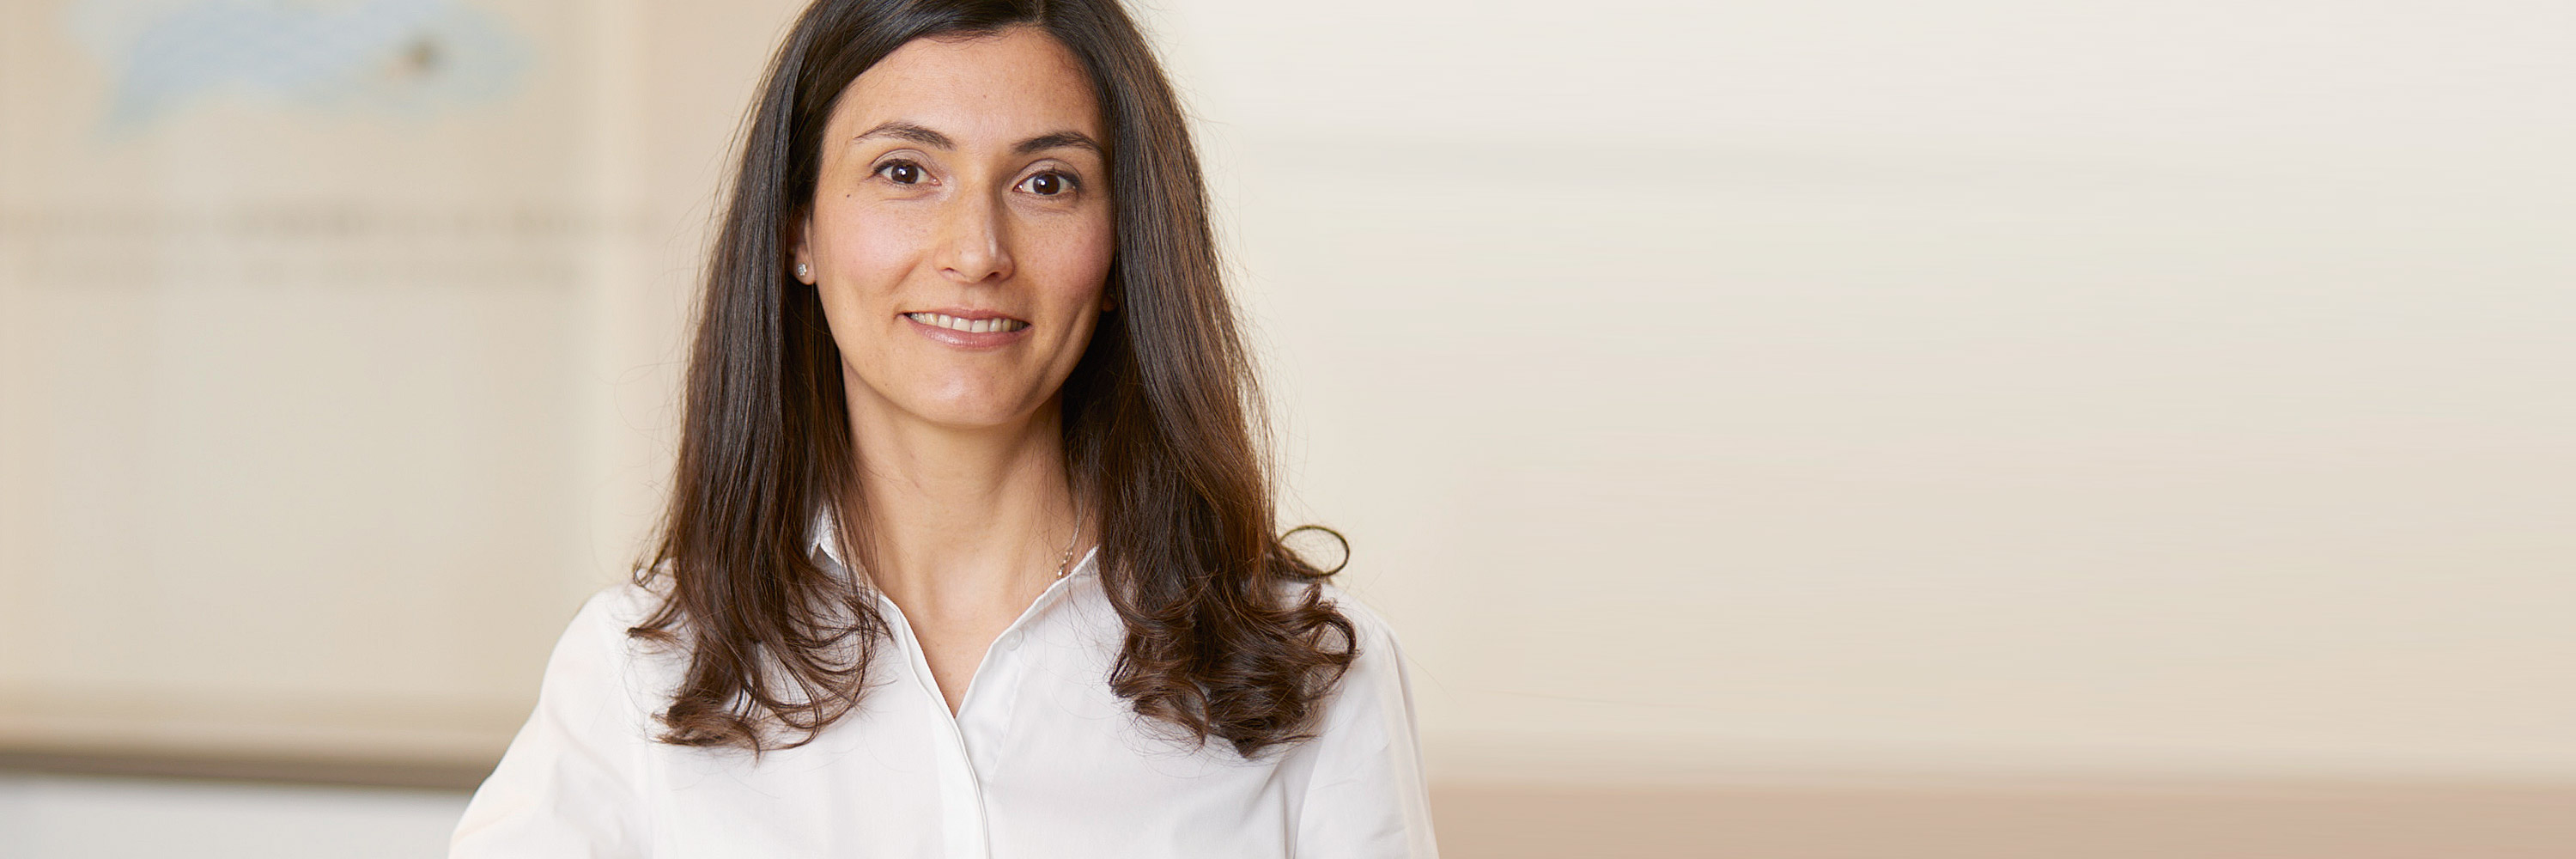 Dermatologist wears a white shirt and has long dark brown hair. She smiles, her black eyes shining. Marta González Sánchez is a specialist in skin cancer screening, tumor surgery, laser therapy, photodynamic therapy and phlebology in Frankfurt.